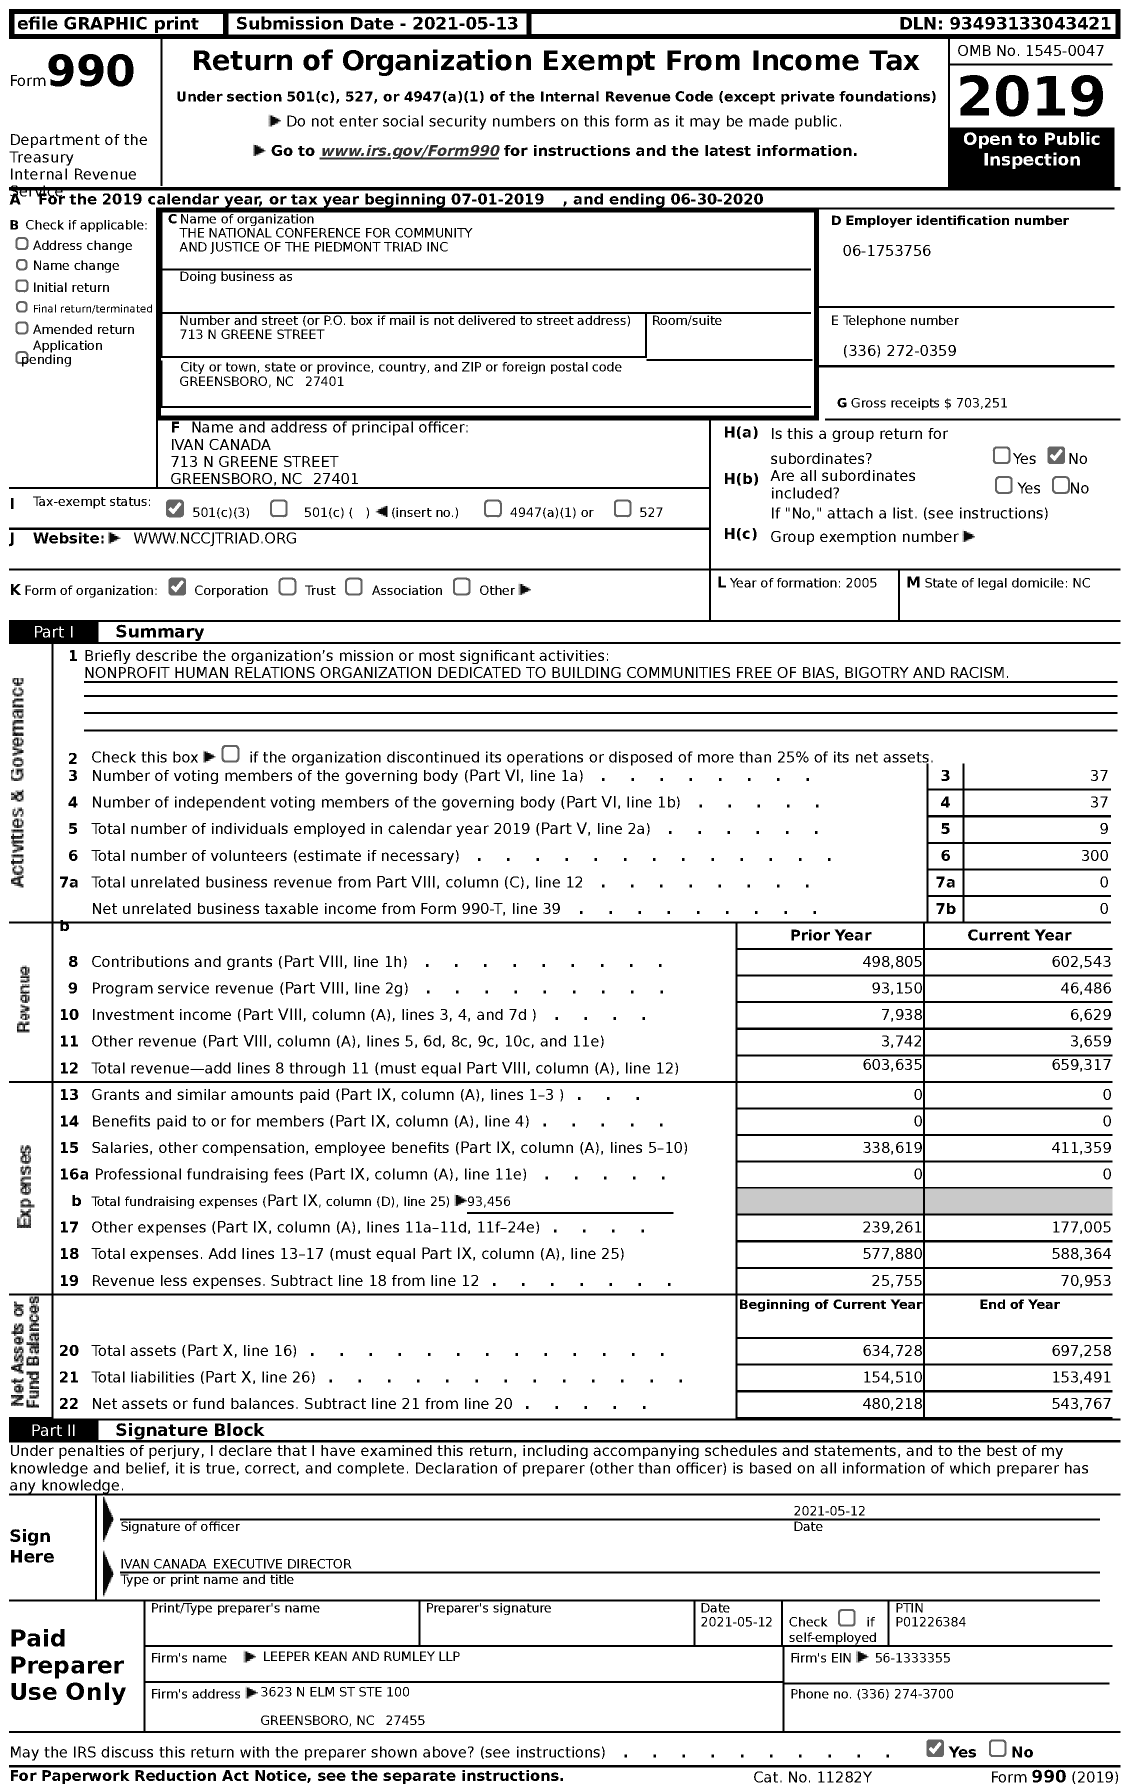 Image of first page of 2019 Form 990 for North Carolina for Community and Justice